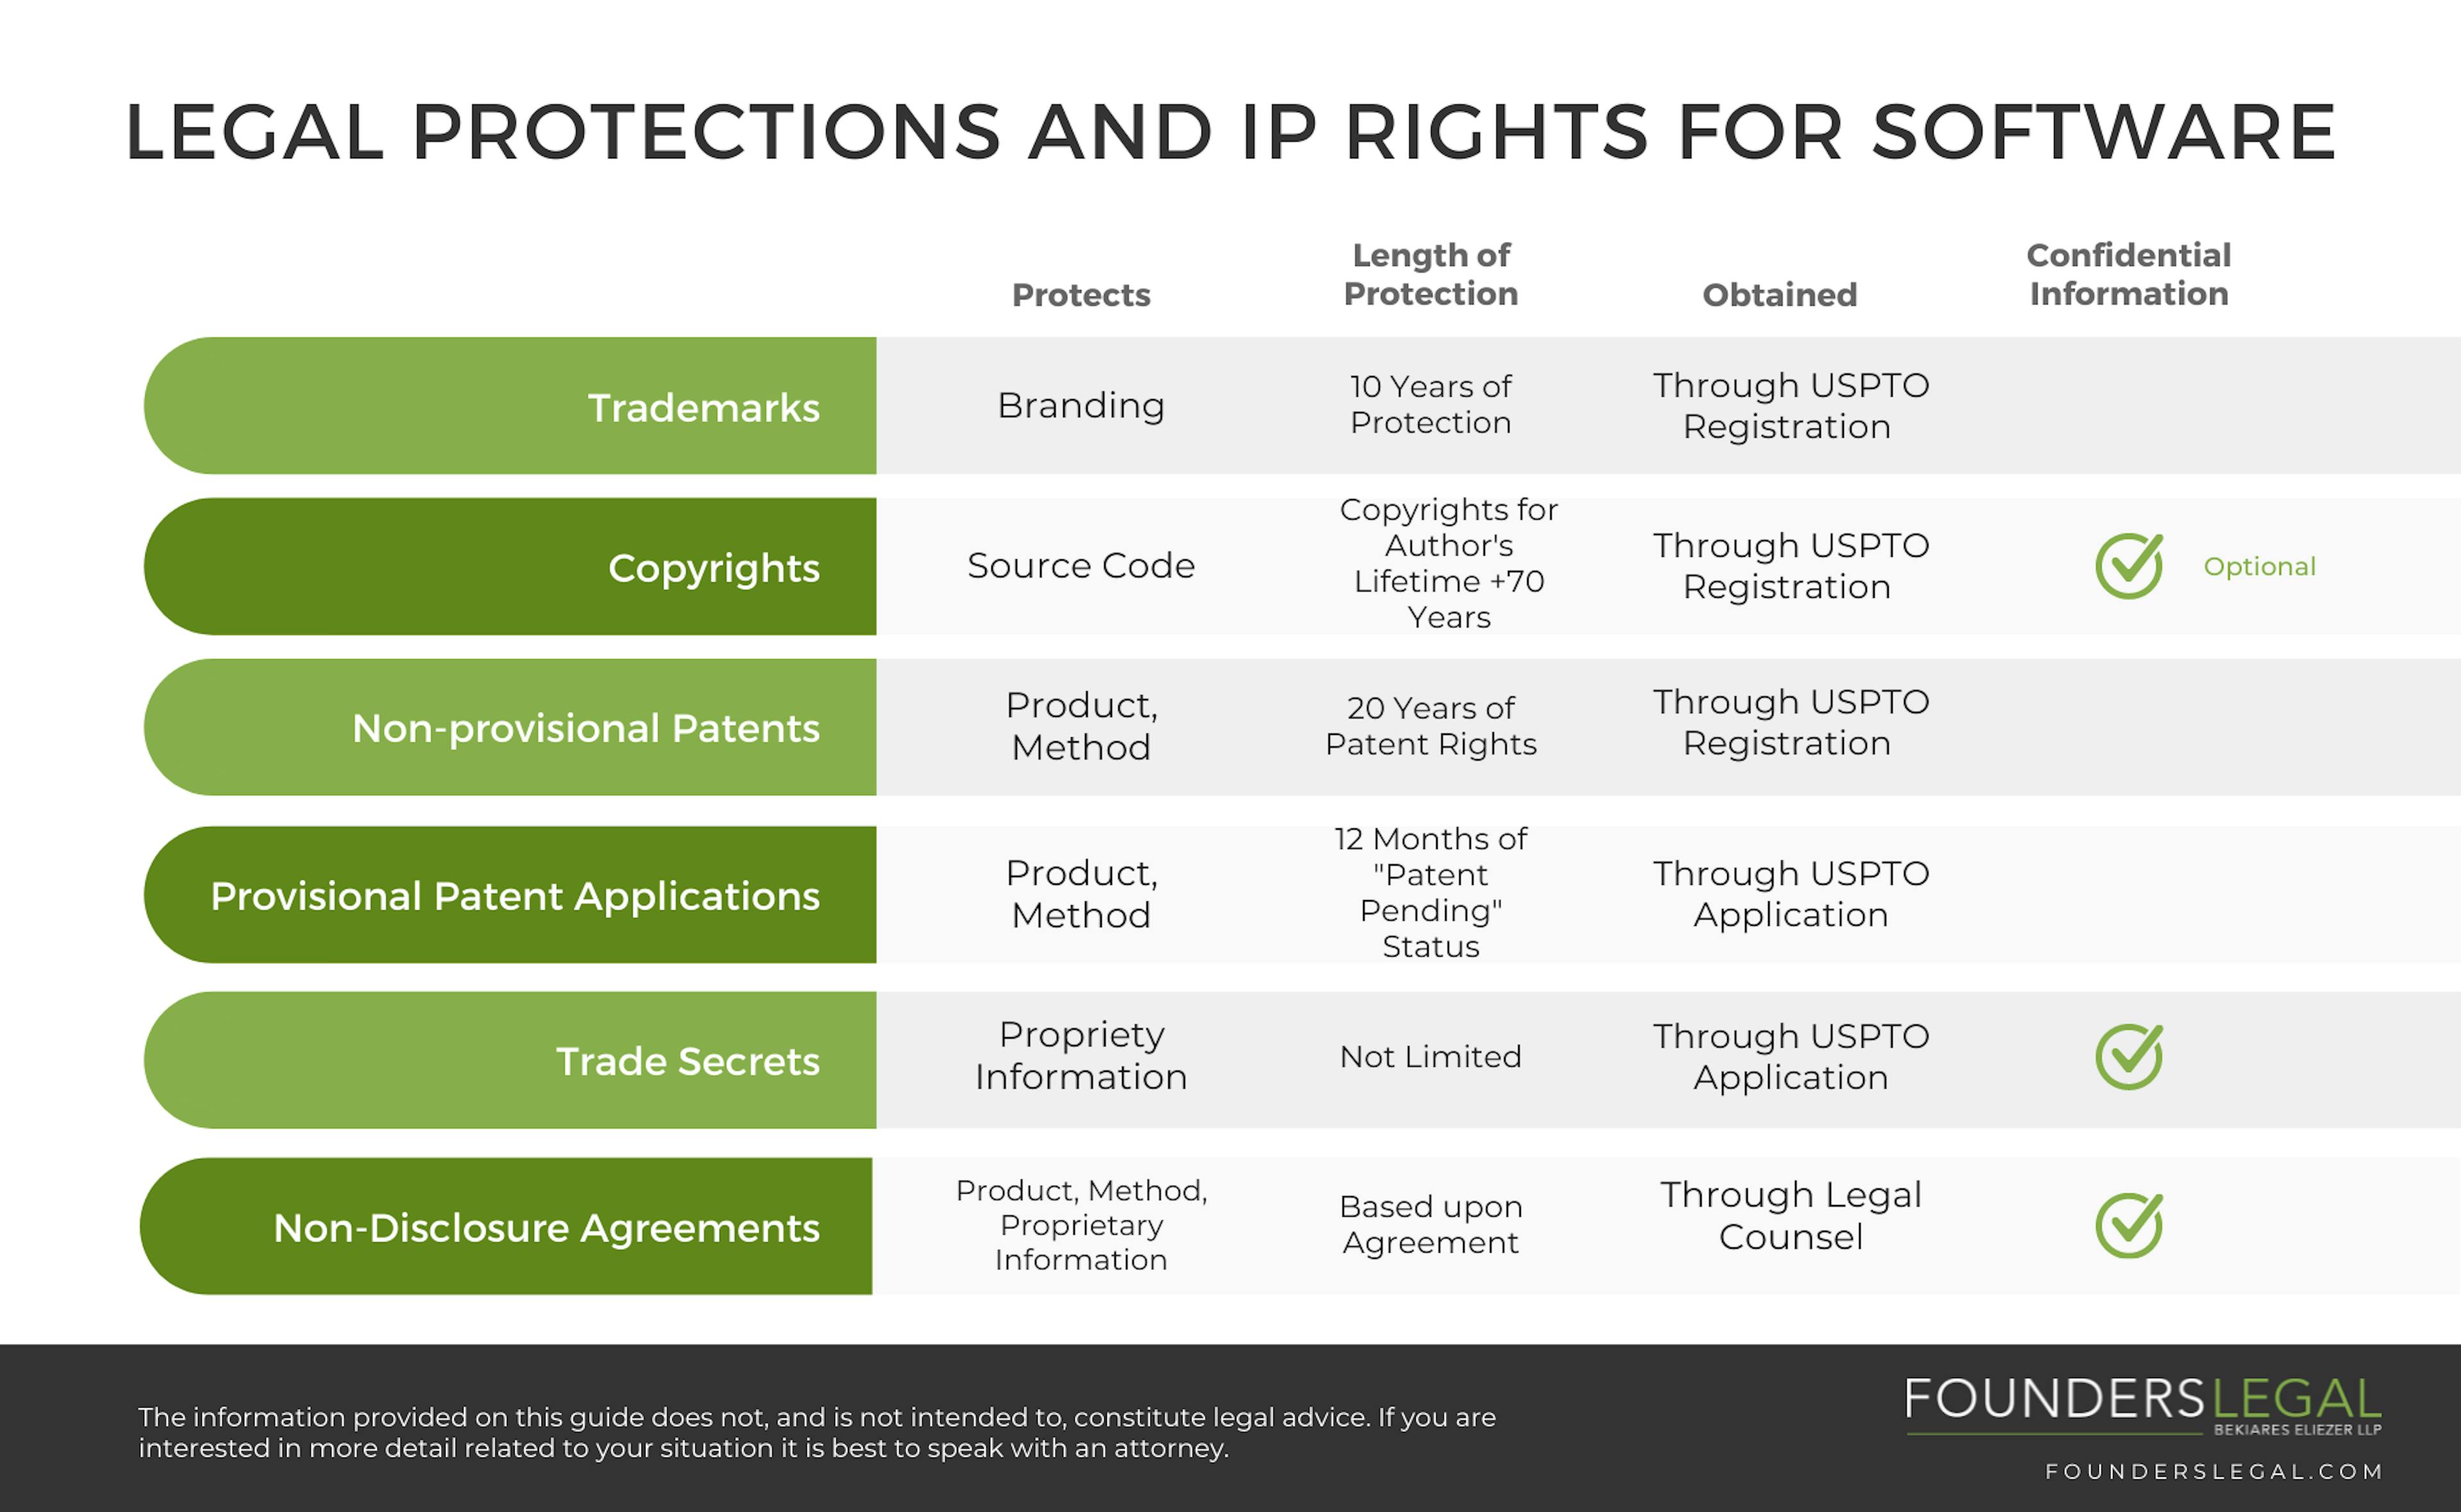 IP and Legal Protections for Software